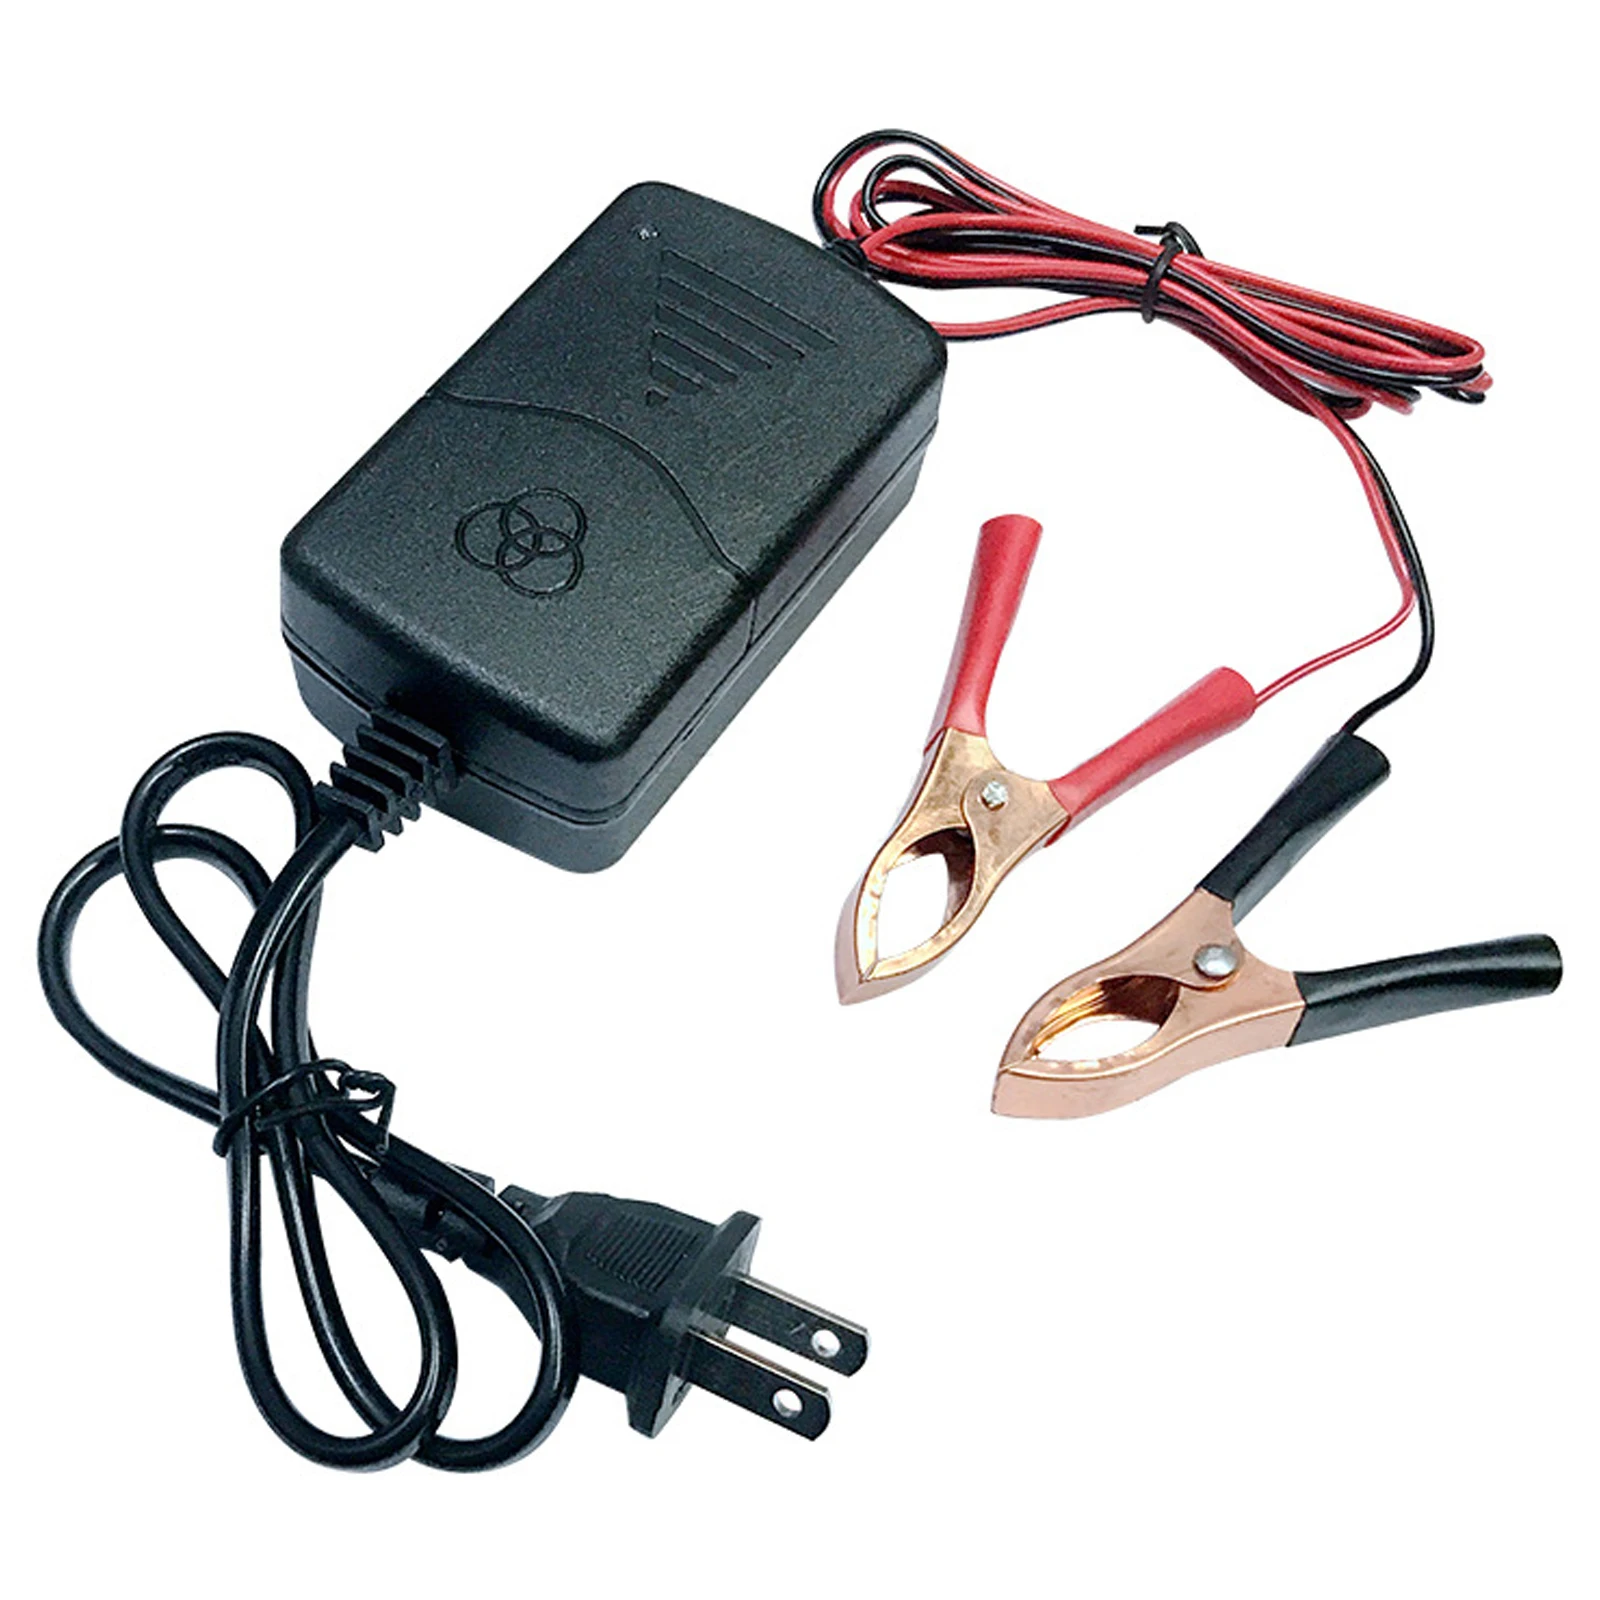 

12V Automobile Automatic Battery Charger For Car Truck Motorcycle Auto Replacement Parts Automobiles Starting Systems